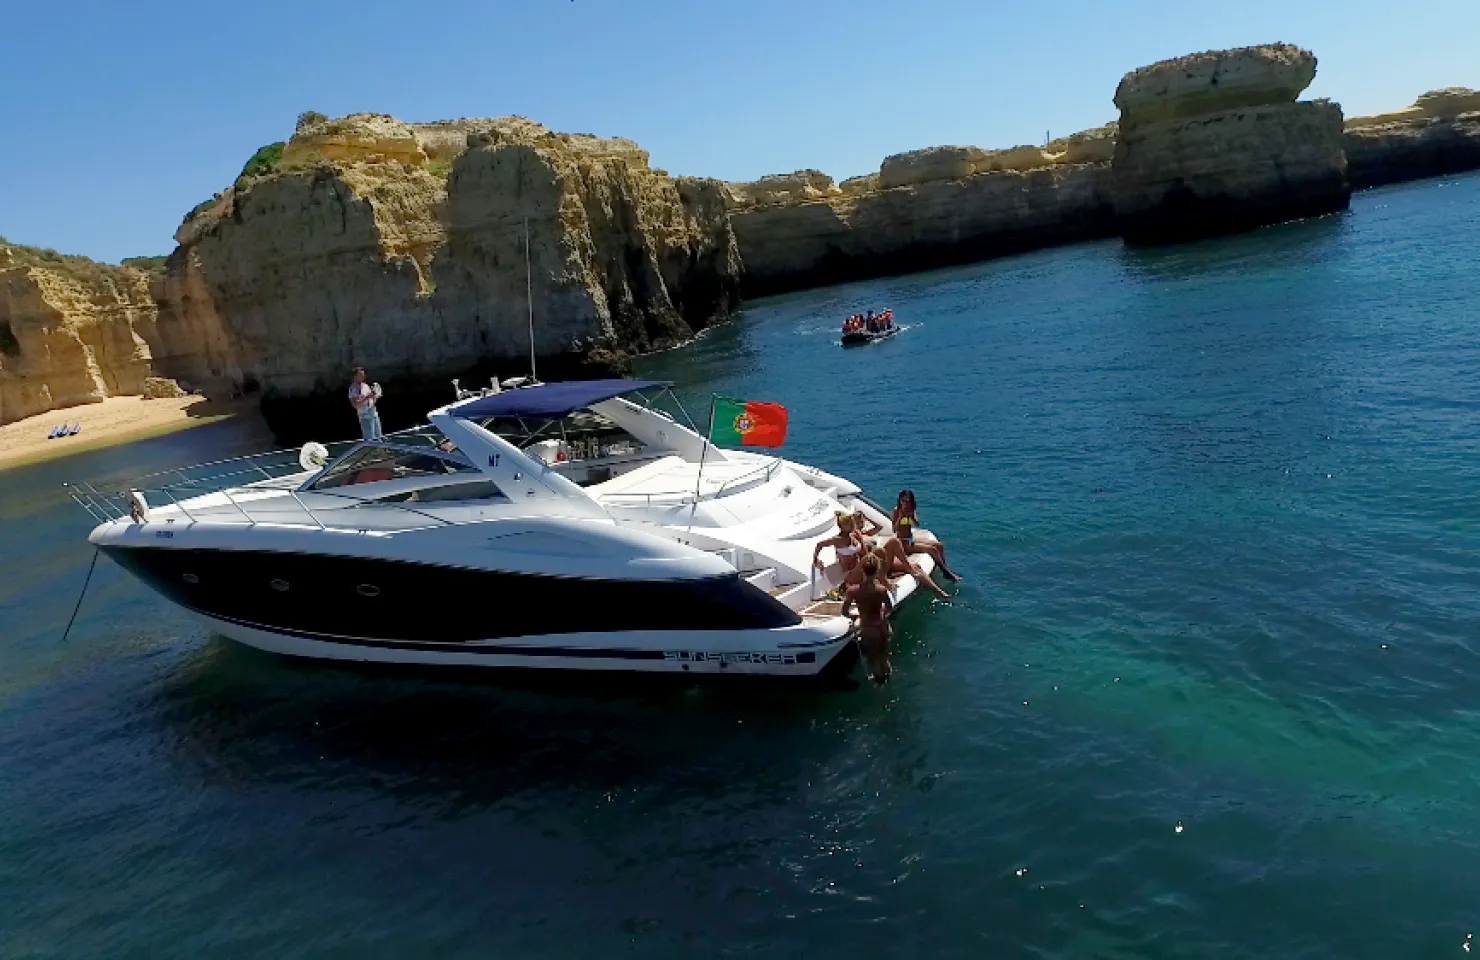 Afternoon Luxury Cruise - Luxury Boat Trips